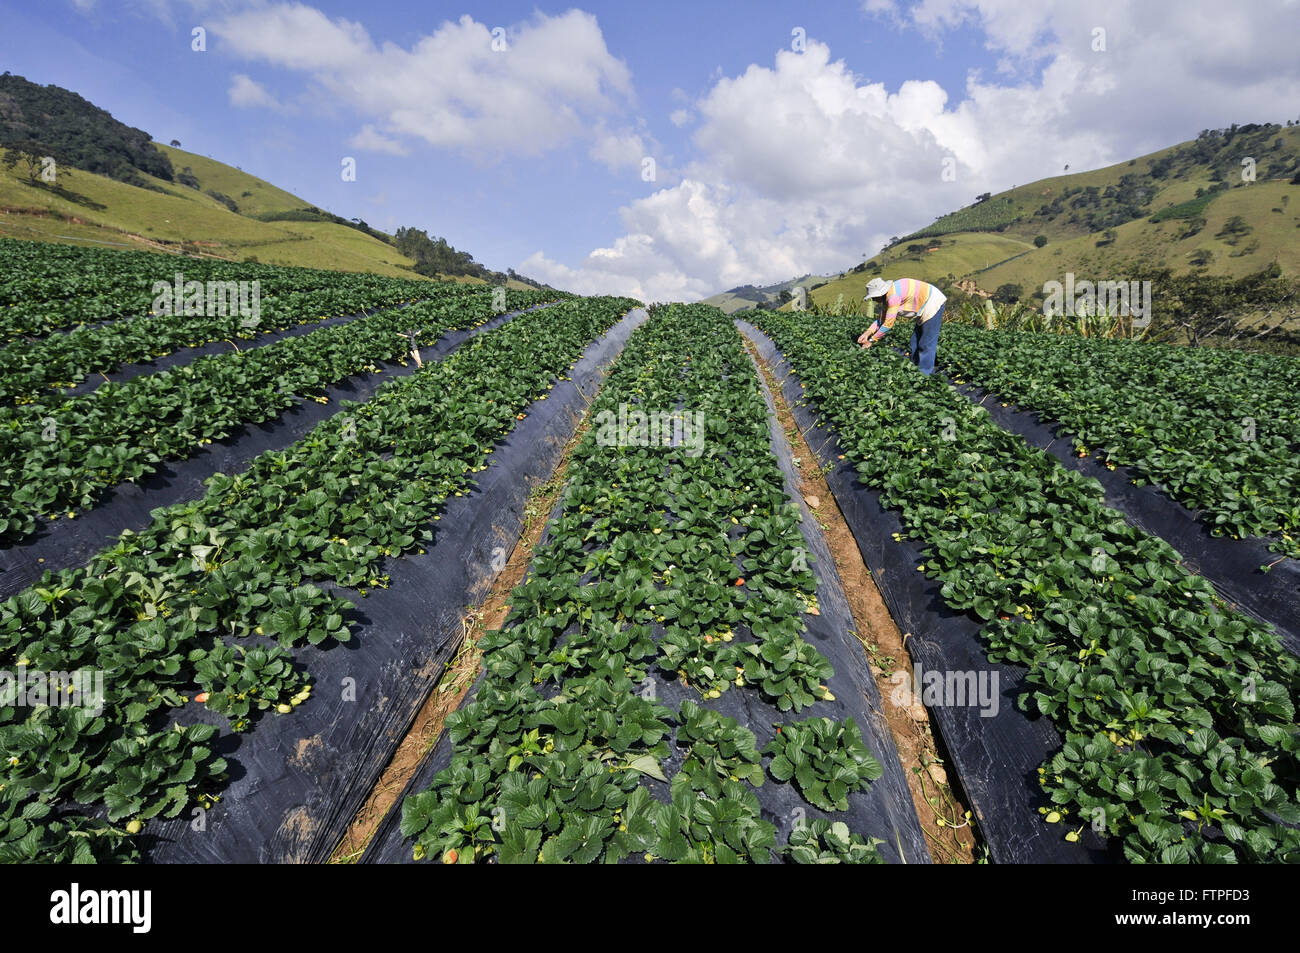 Plantation of strawberries in the rural town of Stowage - southern region of Minas Gerais Stock Photo